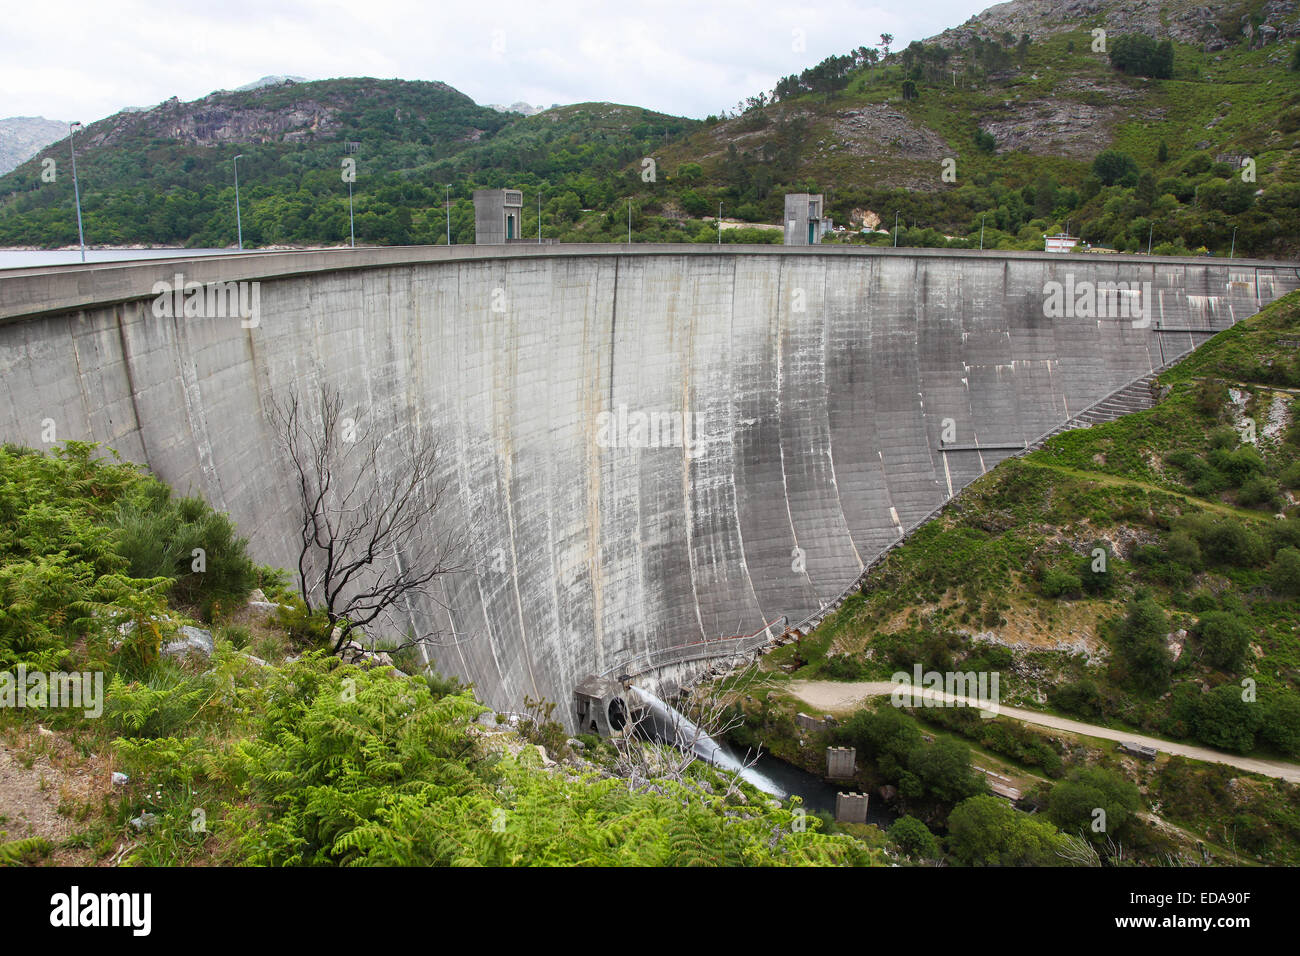 Hydropower dam in Peneda Geres, the only national park in Portugal, located in the Norte region. Stock Photo